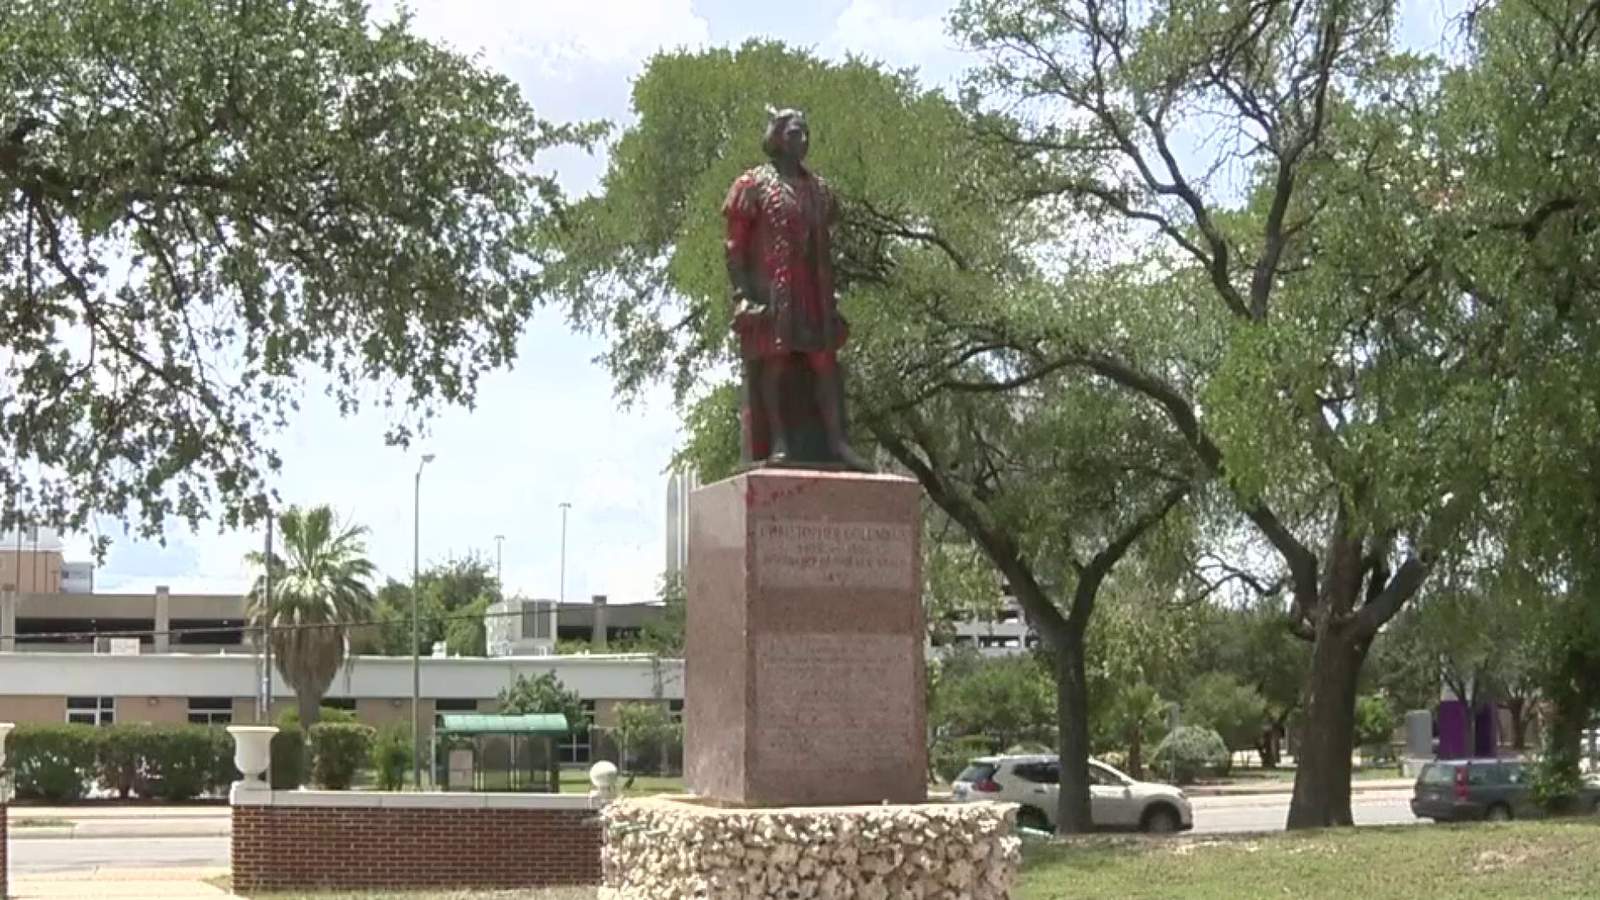 Council approves permanent removal of Christopher Columbus statue, renaming of park